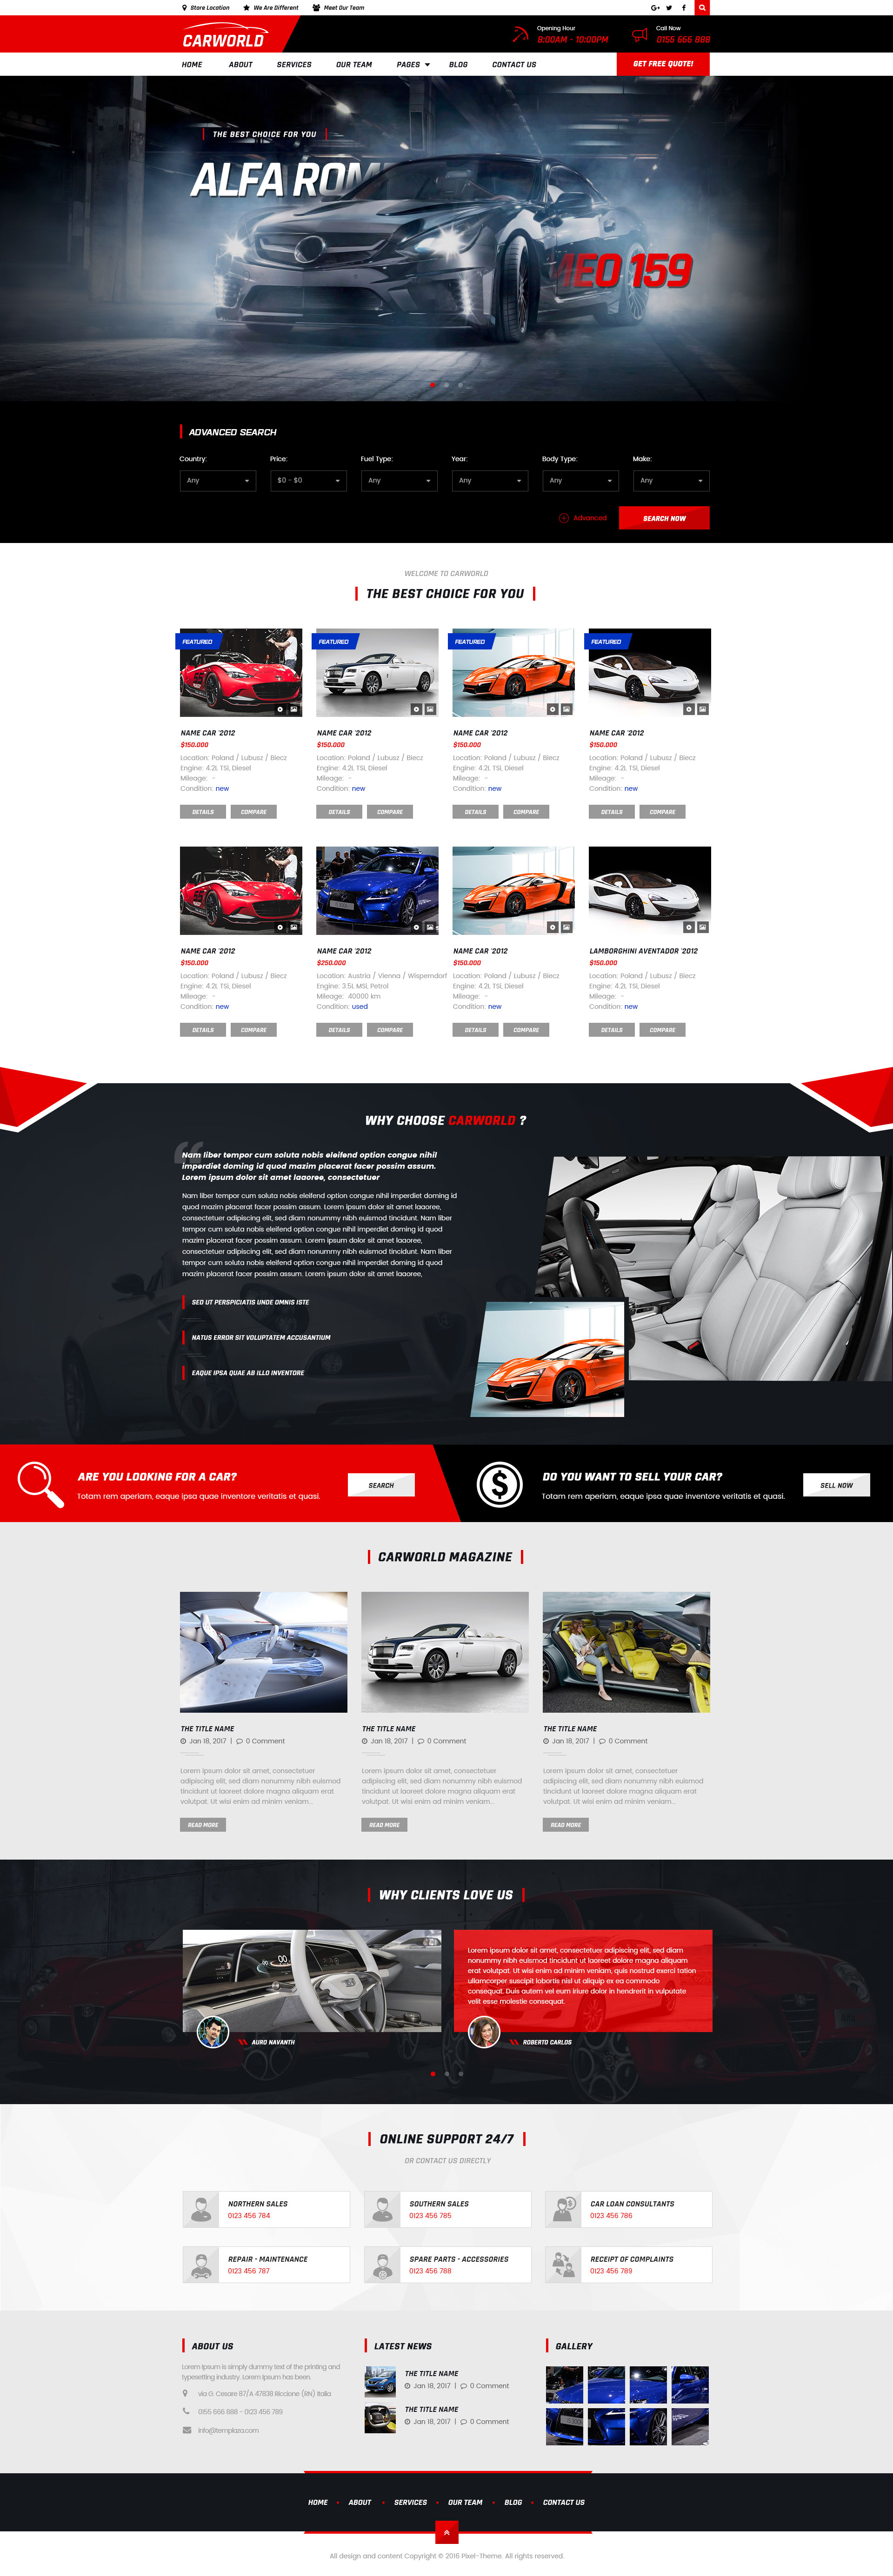 Car Service Website Template Free Download from s3.envato.com